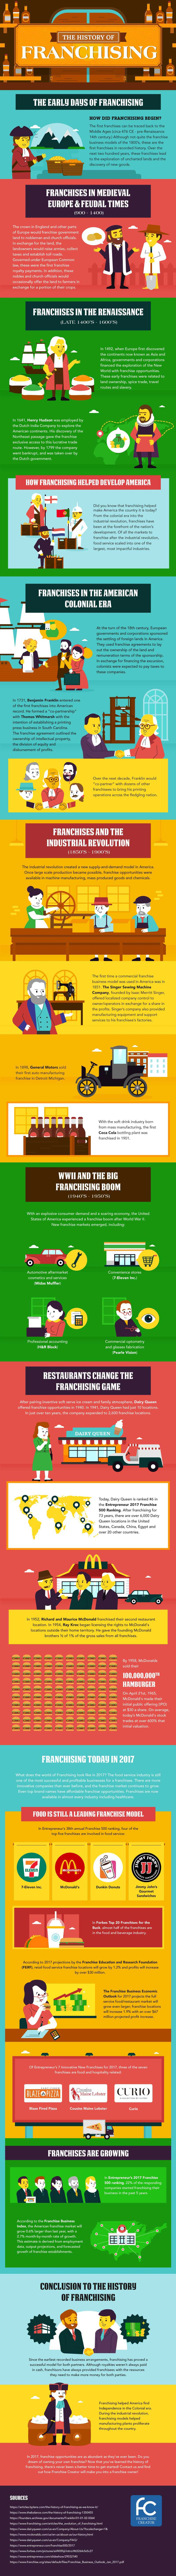 The History of Franchising 